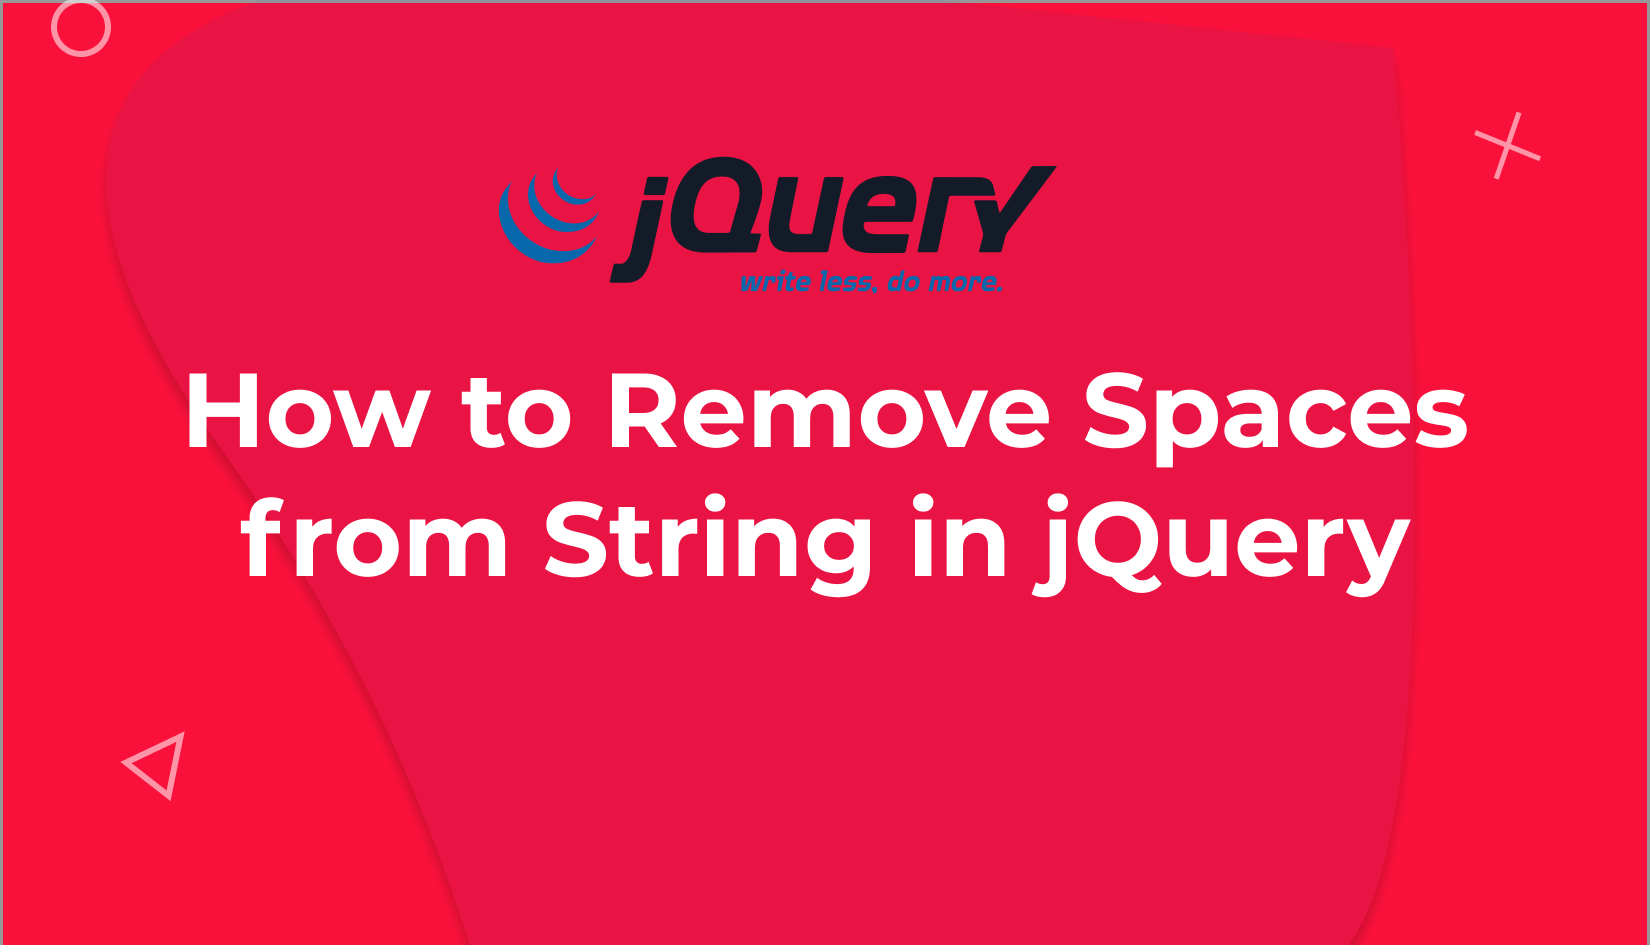 How to Remove Spaces from String in jQuery